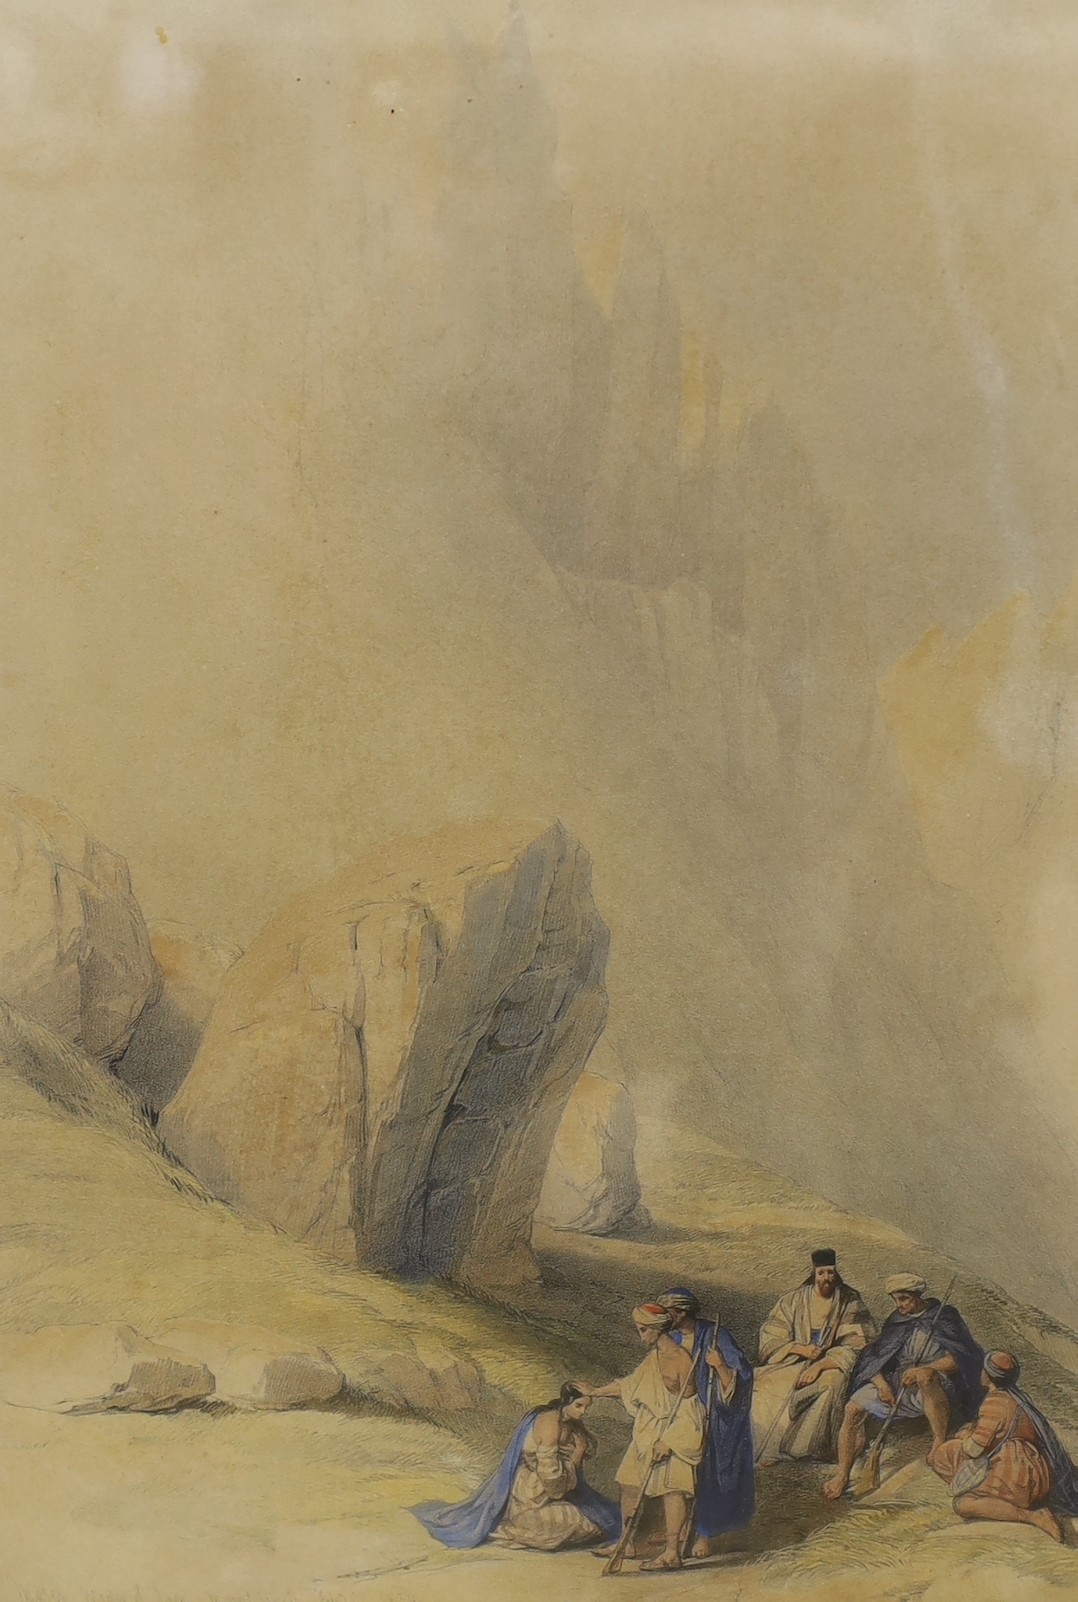 David Roberts (1796-1864), set of three hand-coloured lithographs: 'The Ascent of the Summit of Sinai', dated 1839, plate 10, 'The Rocks of Moses', 1839, plate 17, and 'Temple of El Knasne Petra', 1839, plate 26, largest